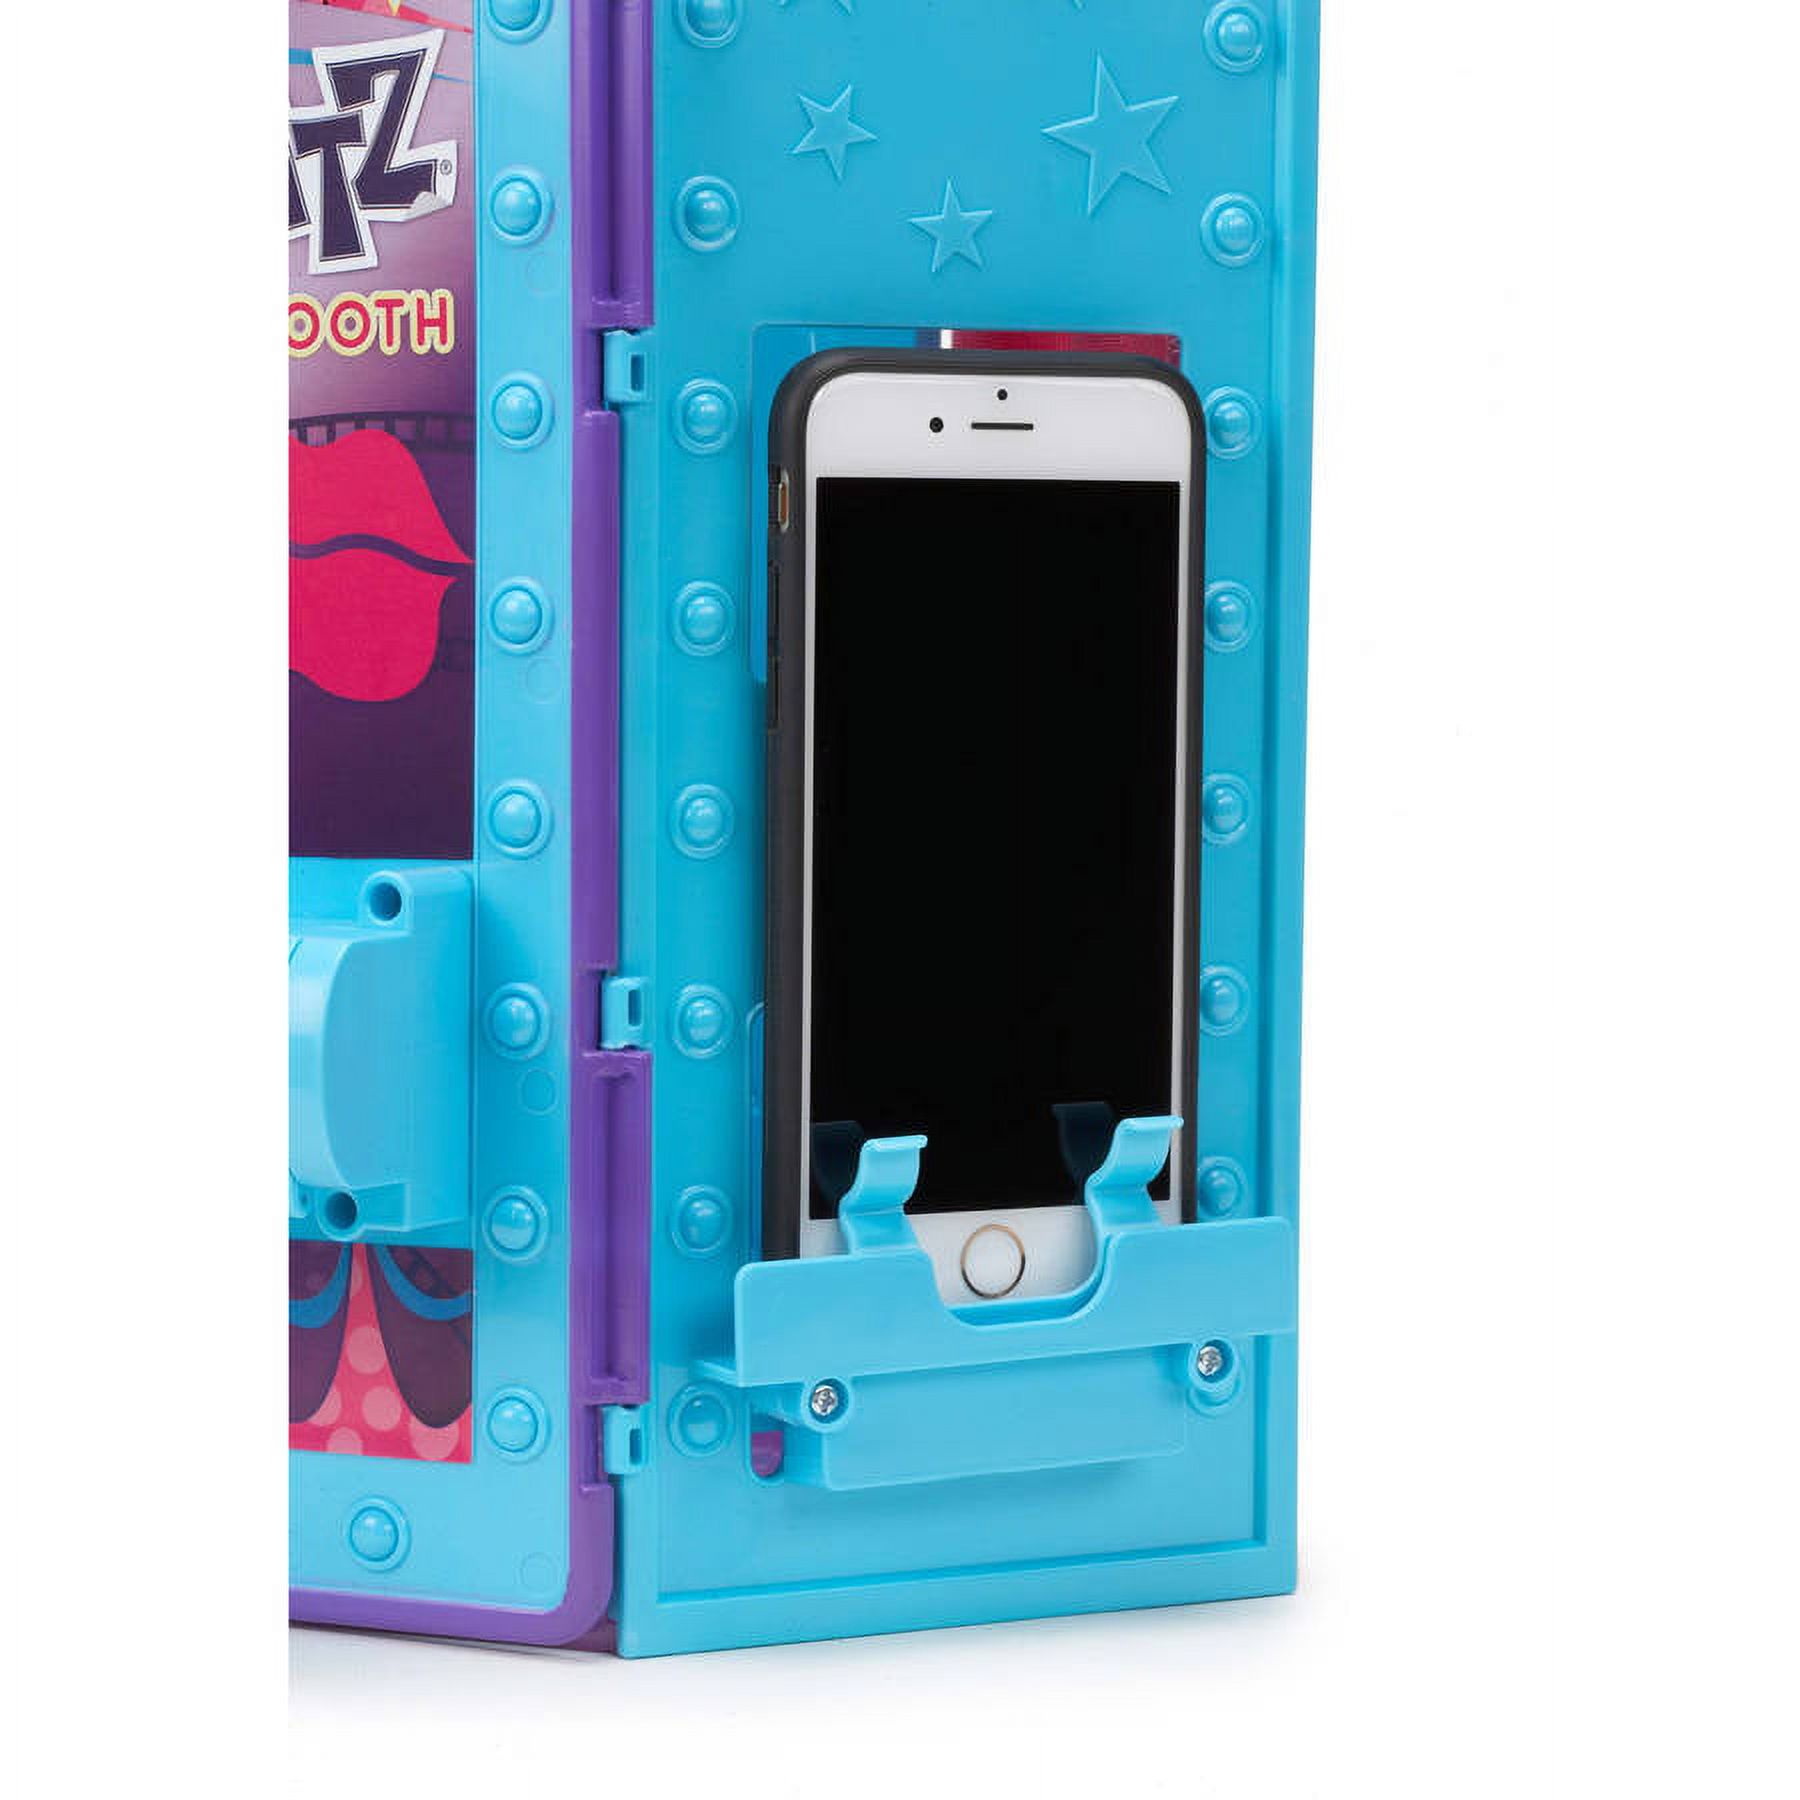 Bratz #SelfieSnaps Photobooth with Doll, Great Gift for Children Ages 6, 7, 8+ - image 3 of 5